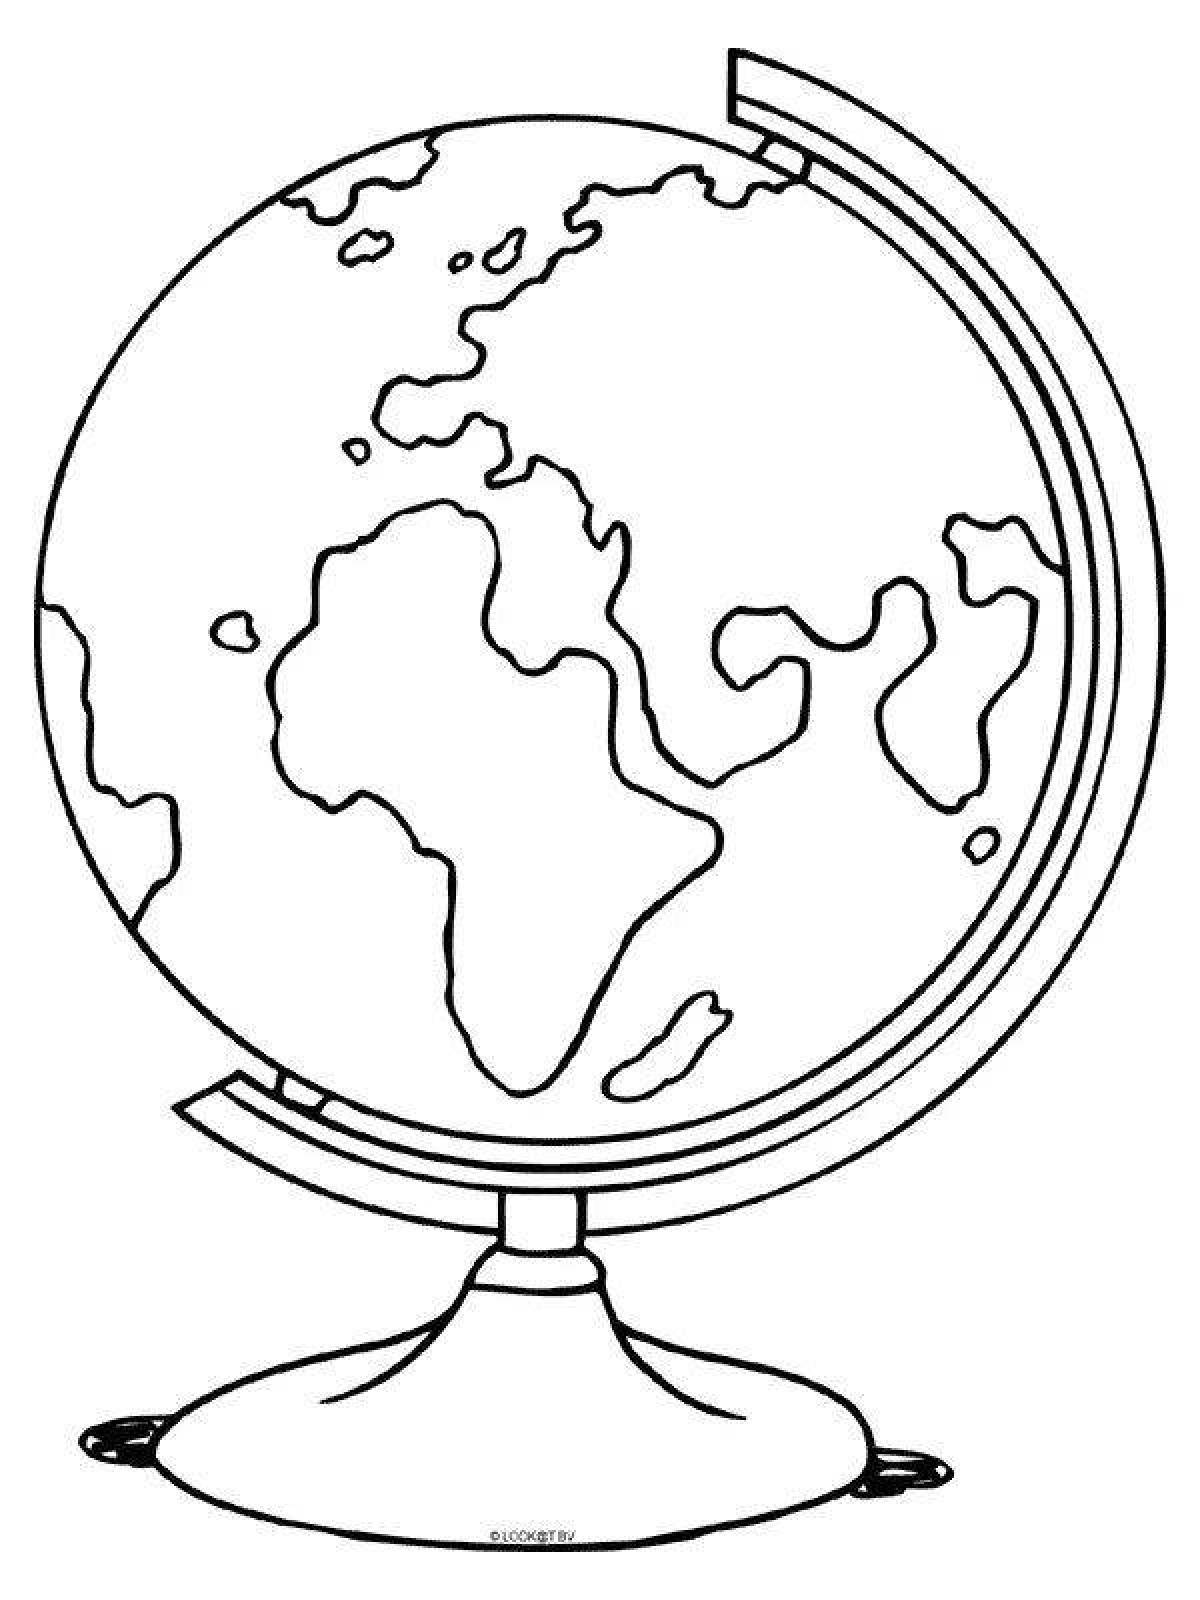 Calming globe coloring page